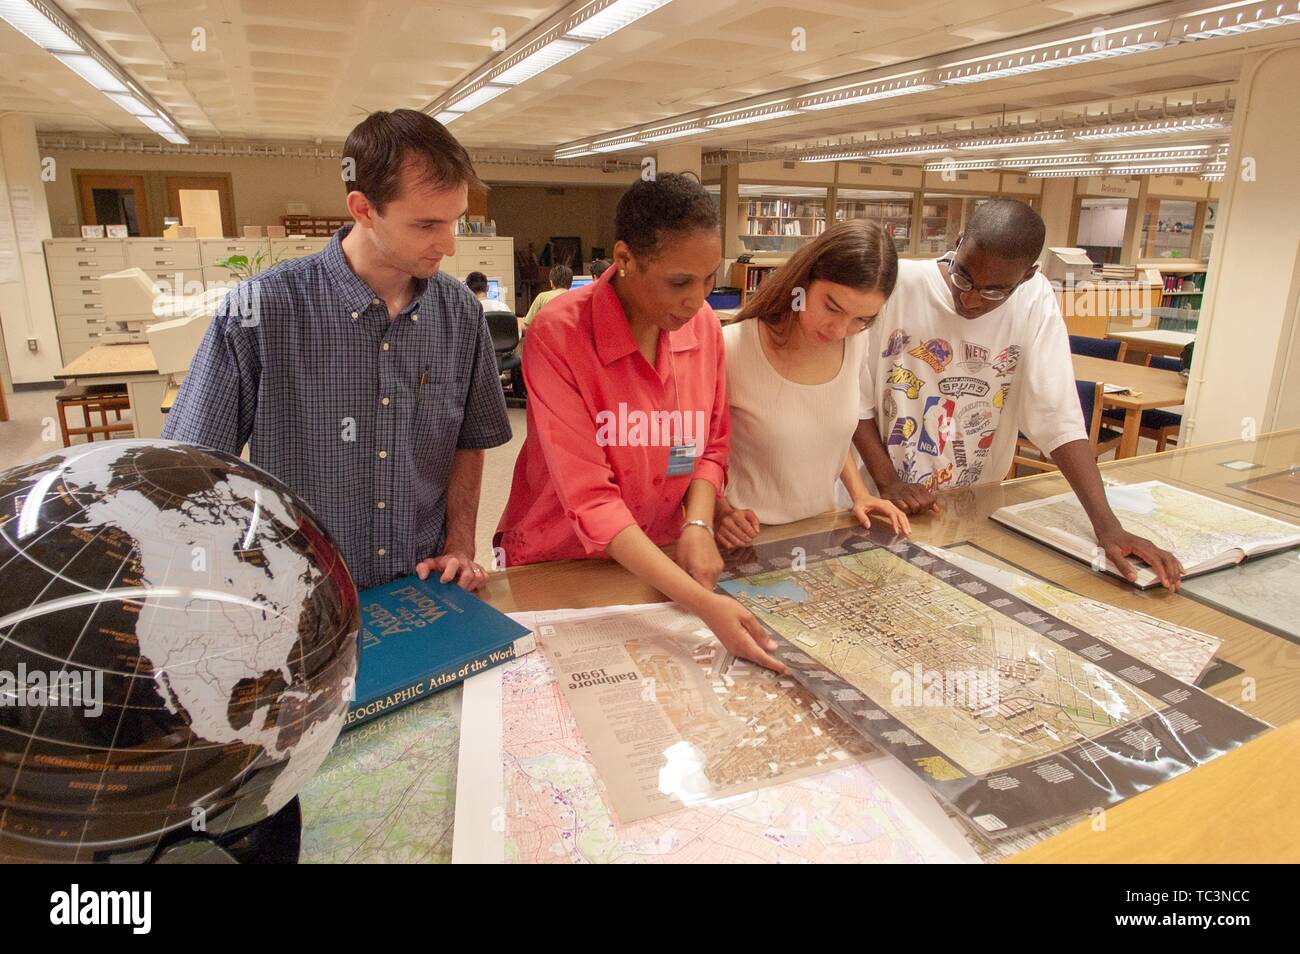 Librarian Sharon Morris helps patrons view a collection of maps in the Milton S Eisenhower Library at the Johns Hopkins University, Baltimore, Maryland, July 21, 2004. From the Homewood Photography Collection. () Stock Photo